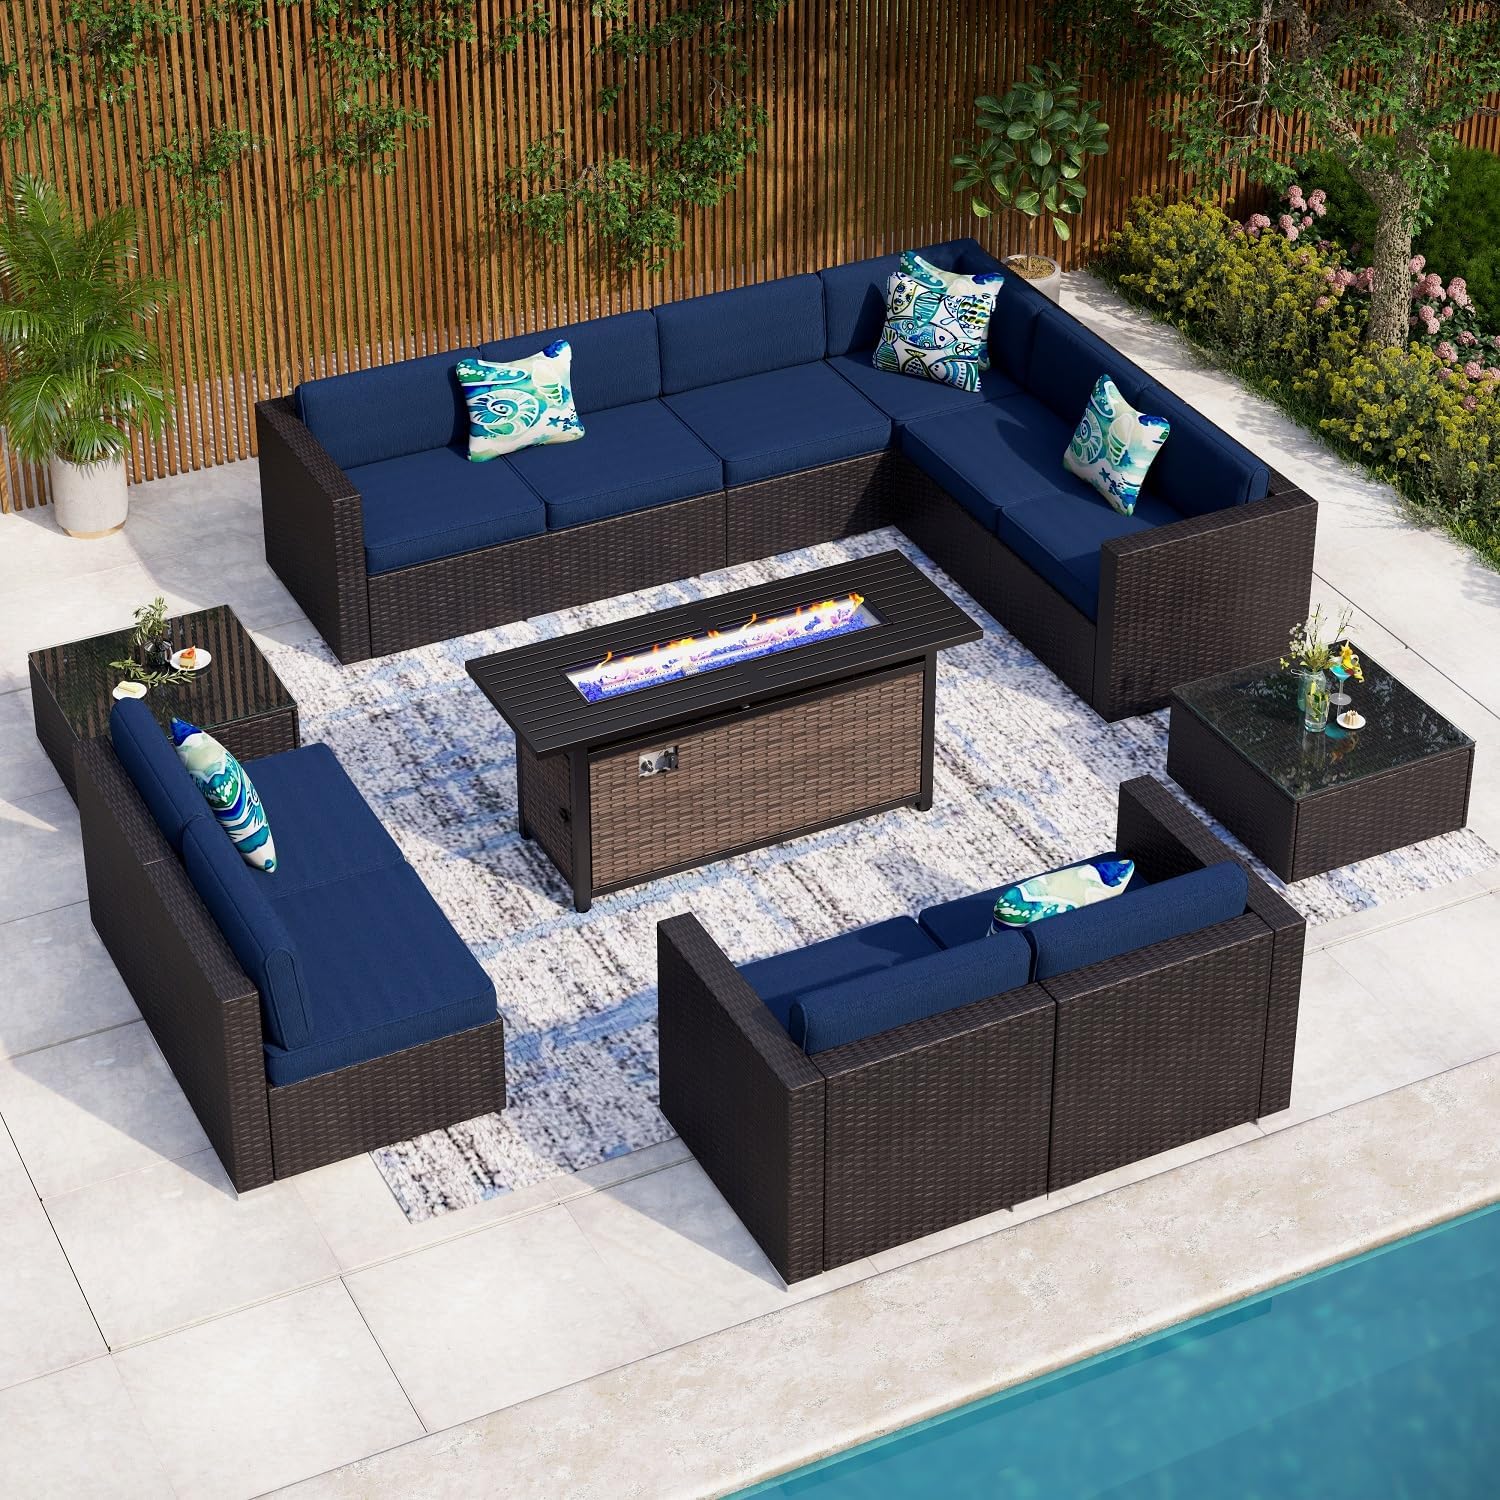 MFSTUDIO 13 Pieces Patio Furniture Set with 56 Plate Embossing Propane Gas Fire Table, Outdoor Wicker PE Rattan Sectional Sofa Conversation Set with Blue Cushions & Glass Table